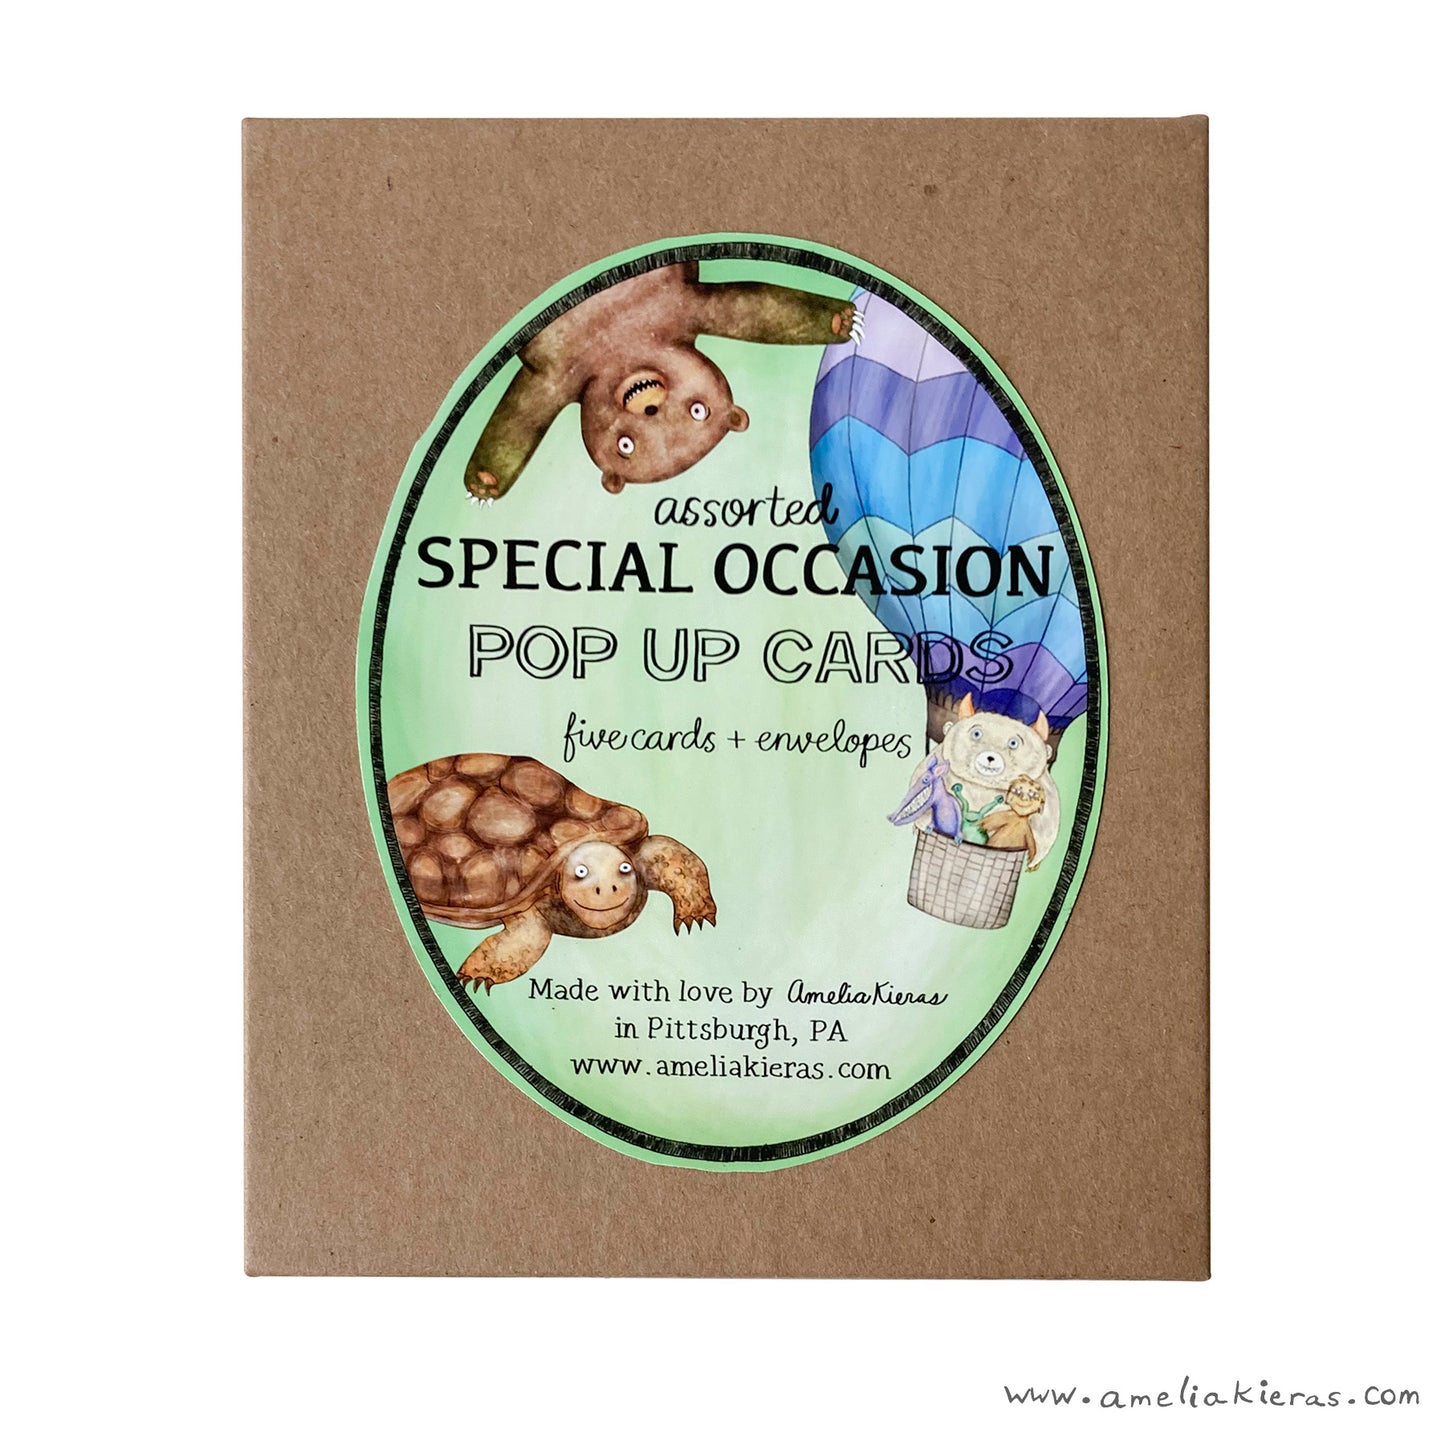 Special Occasion Pop Up Card Box Set - Set of Five Assorted Pop Up Cards